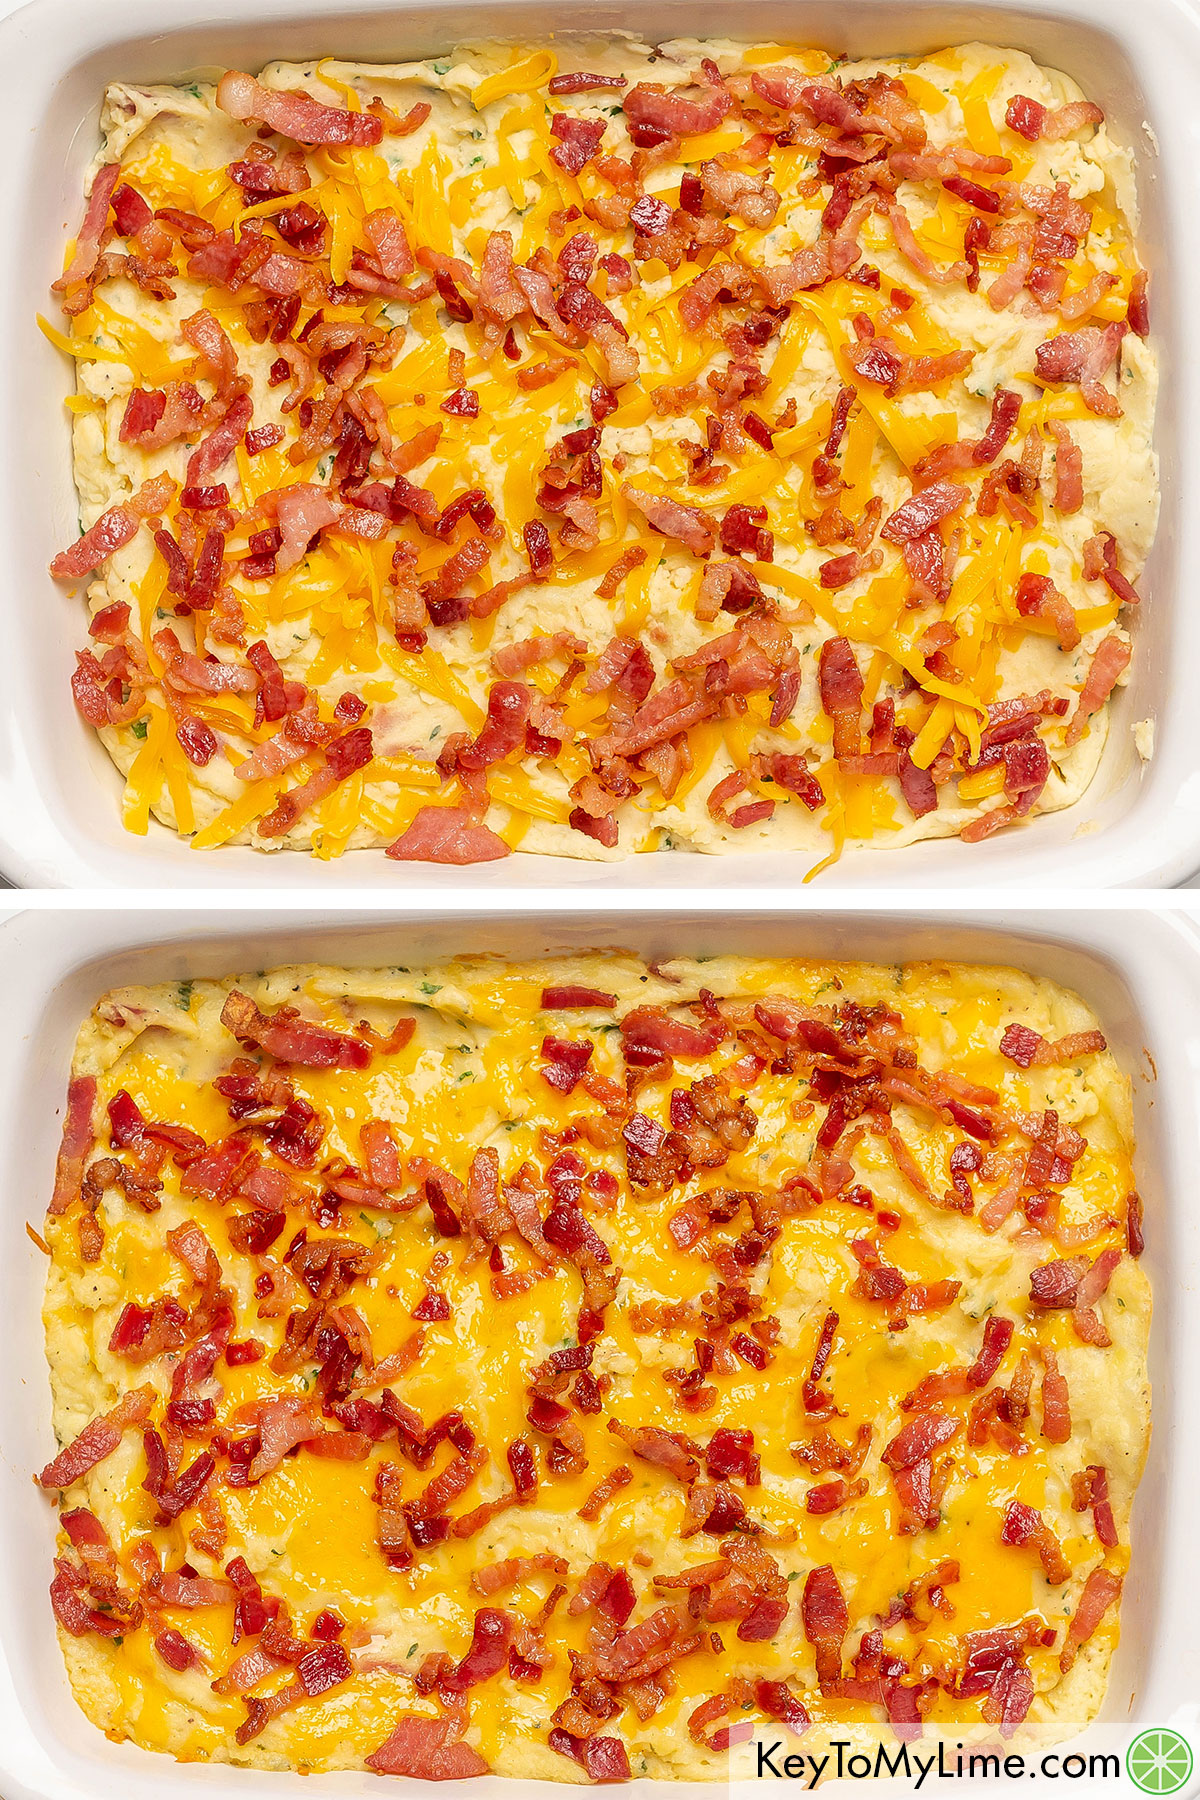 Sprinkling the remaining cheese and bacon over the potato mixture, and then baking in the oven.